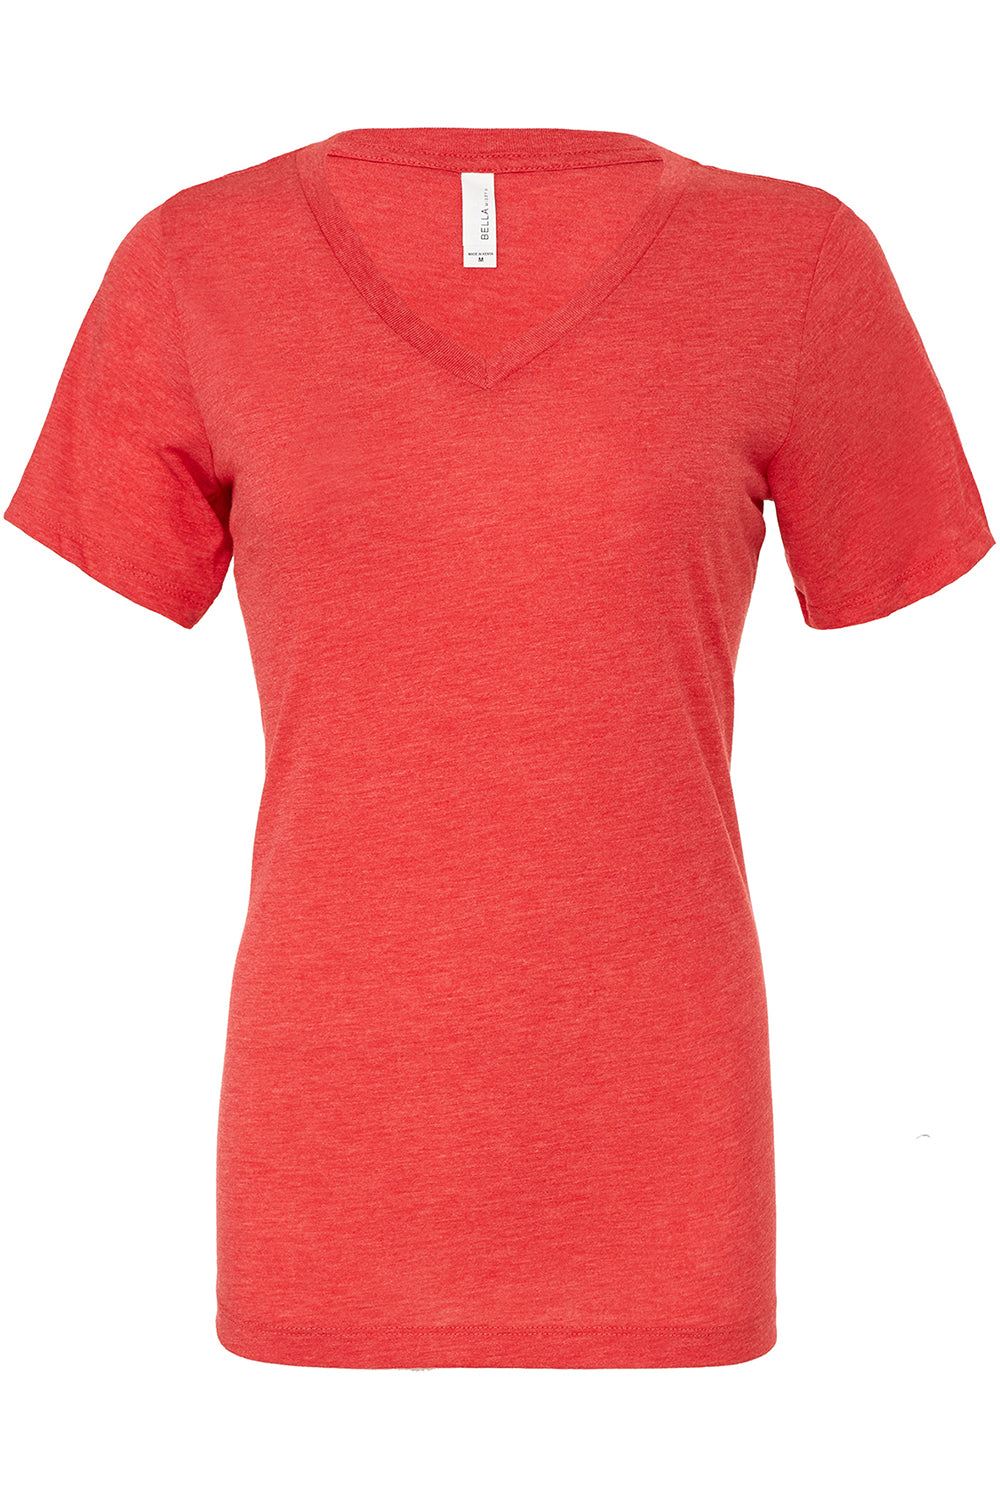 Bella + Canvas BC6405/6405 Womens Relaxed Jersey Short Sleeve V-Neck T-Shirt Red Triblend Flat Front